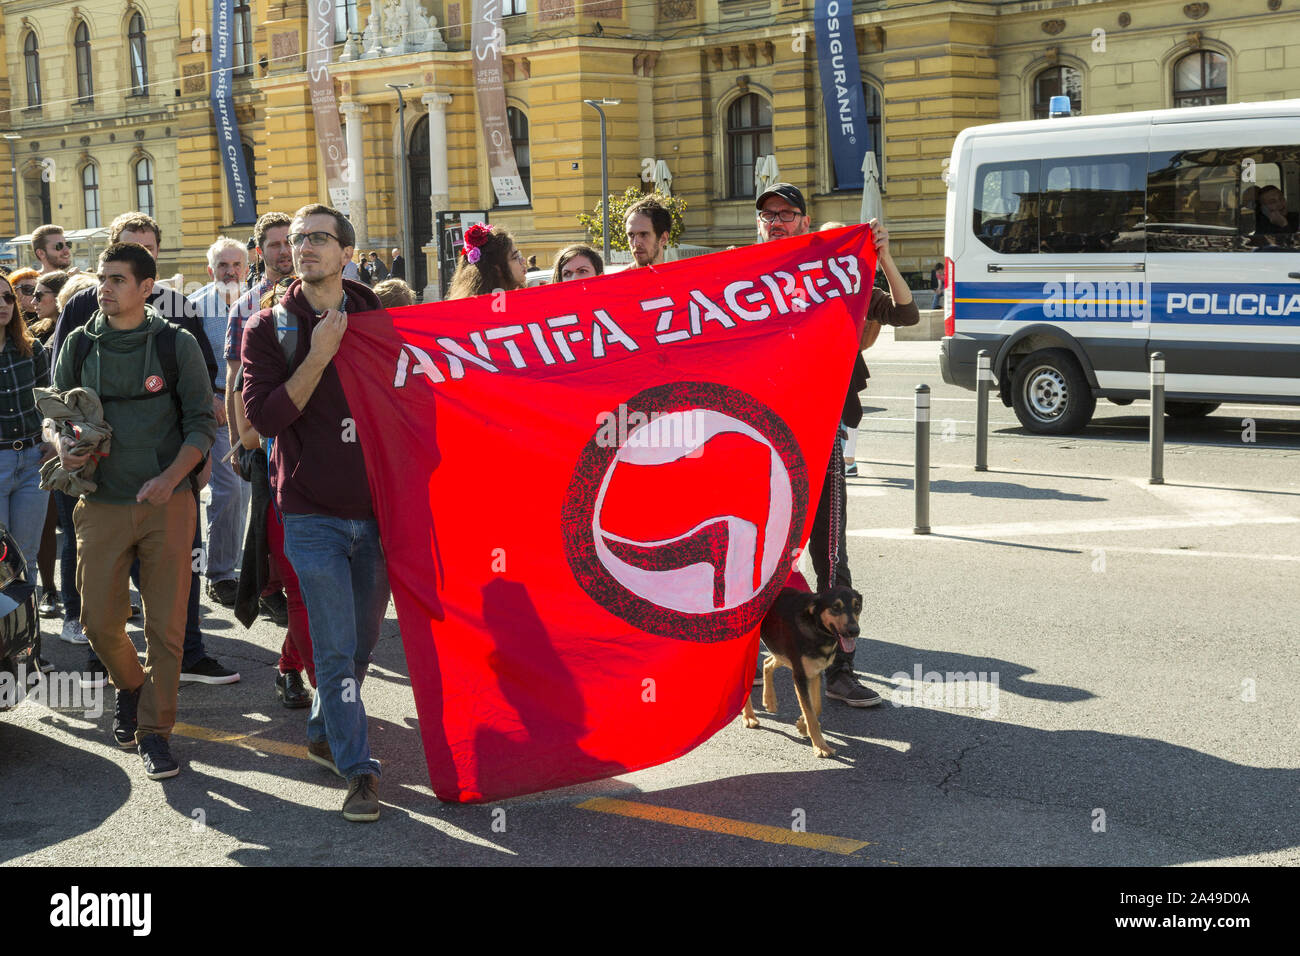 Demonstrations against right wing political parties in Croatia Stock Photo